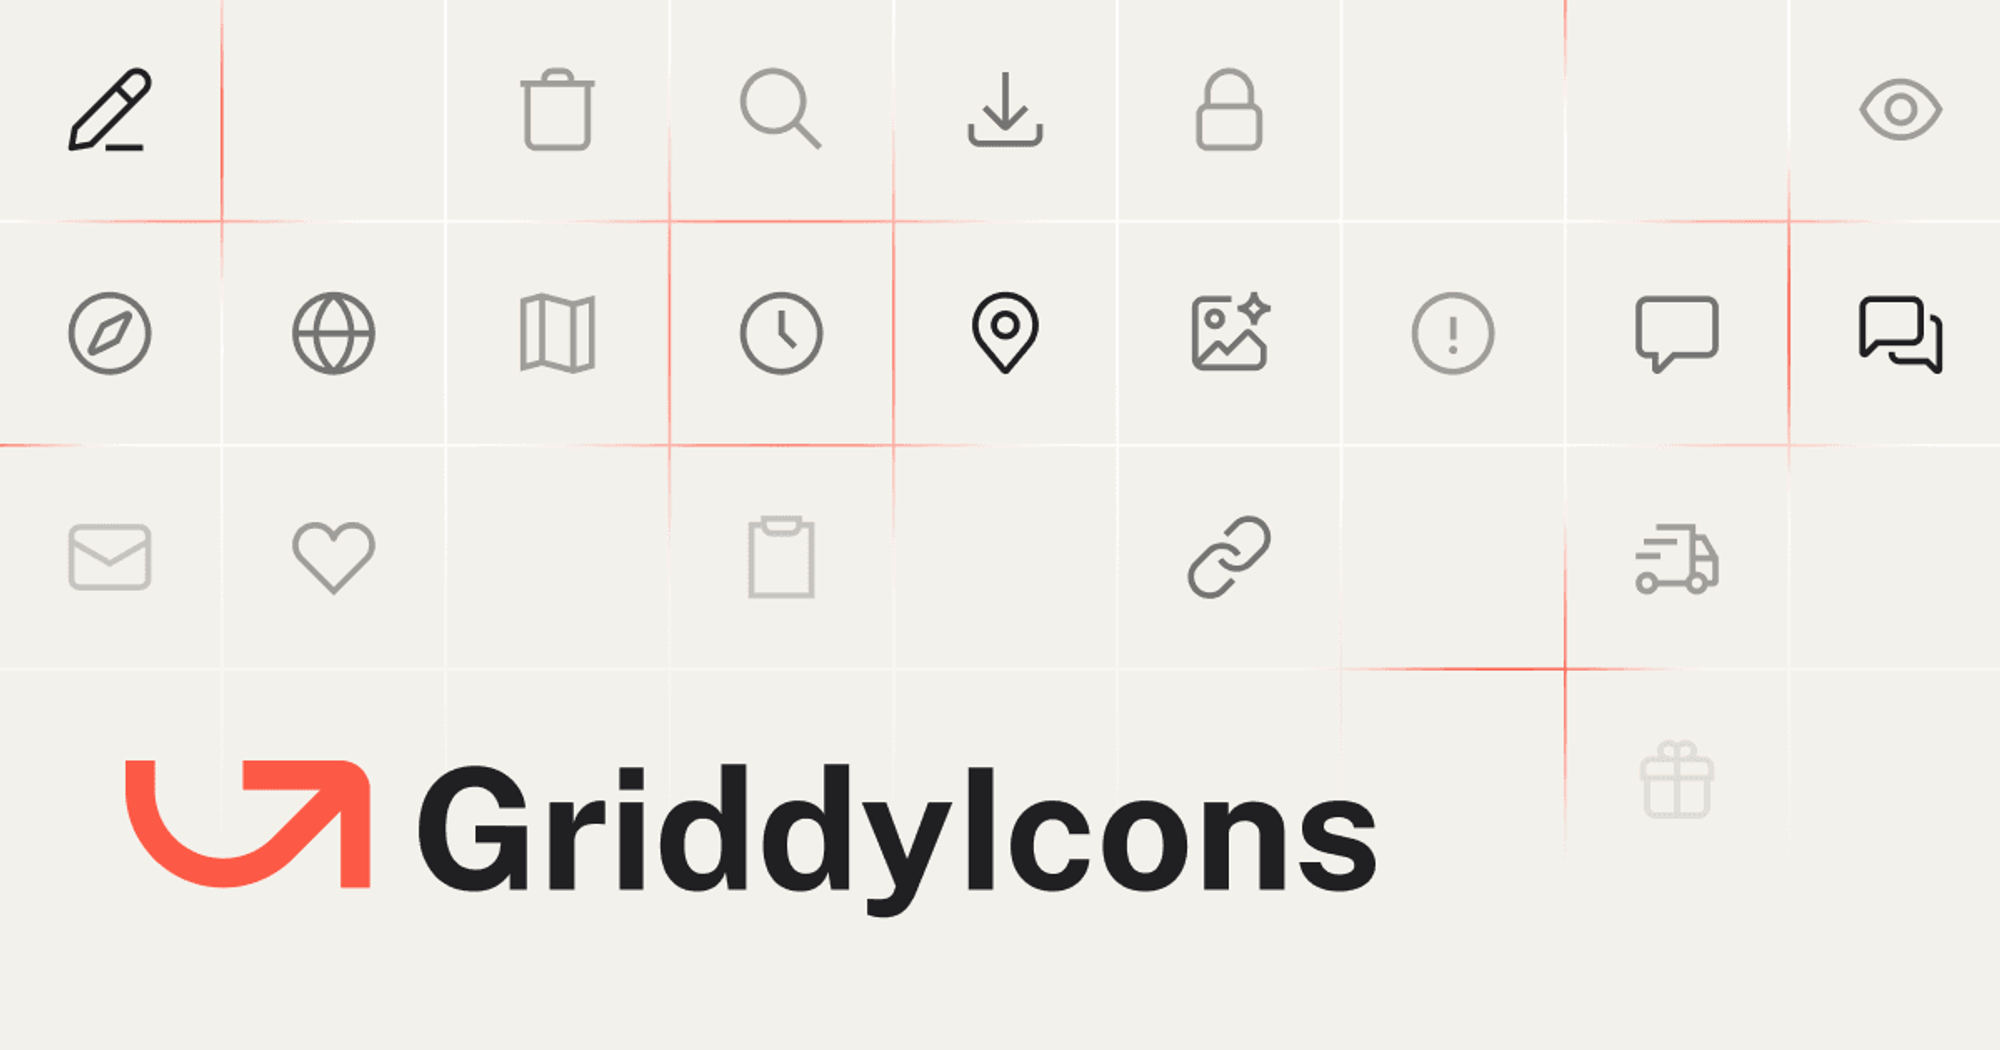 Griddy Icons